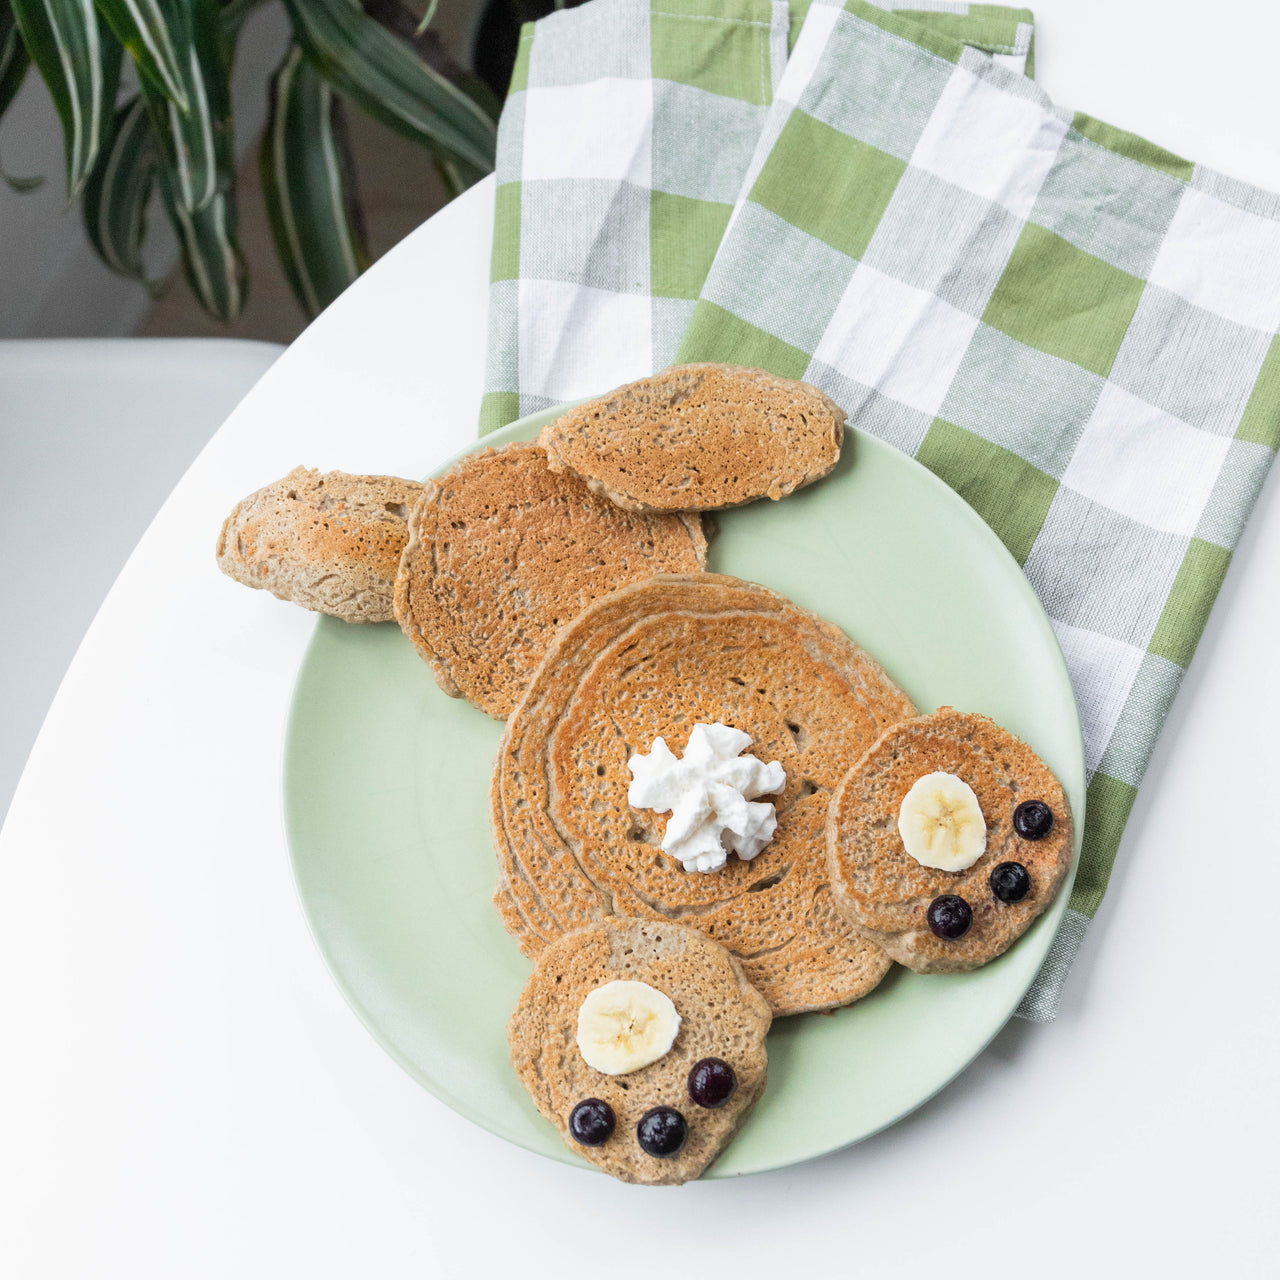 Bunny shaped pancakes on green plate